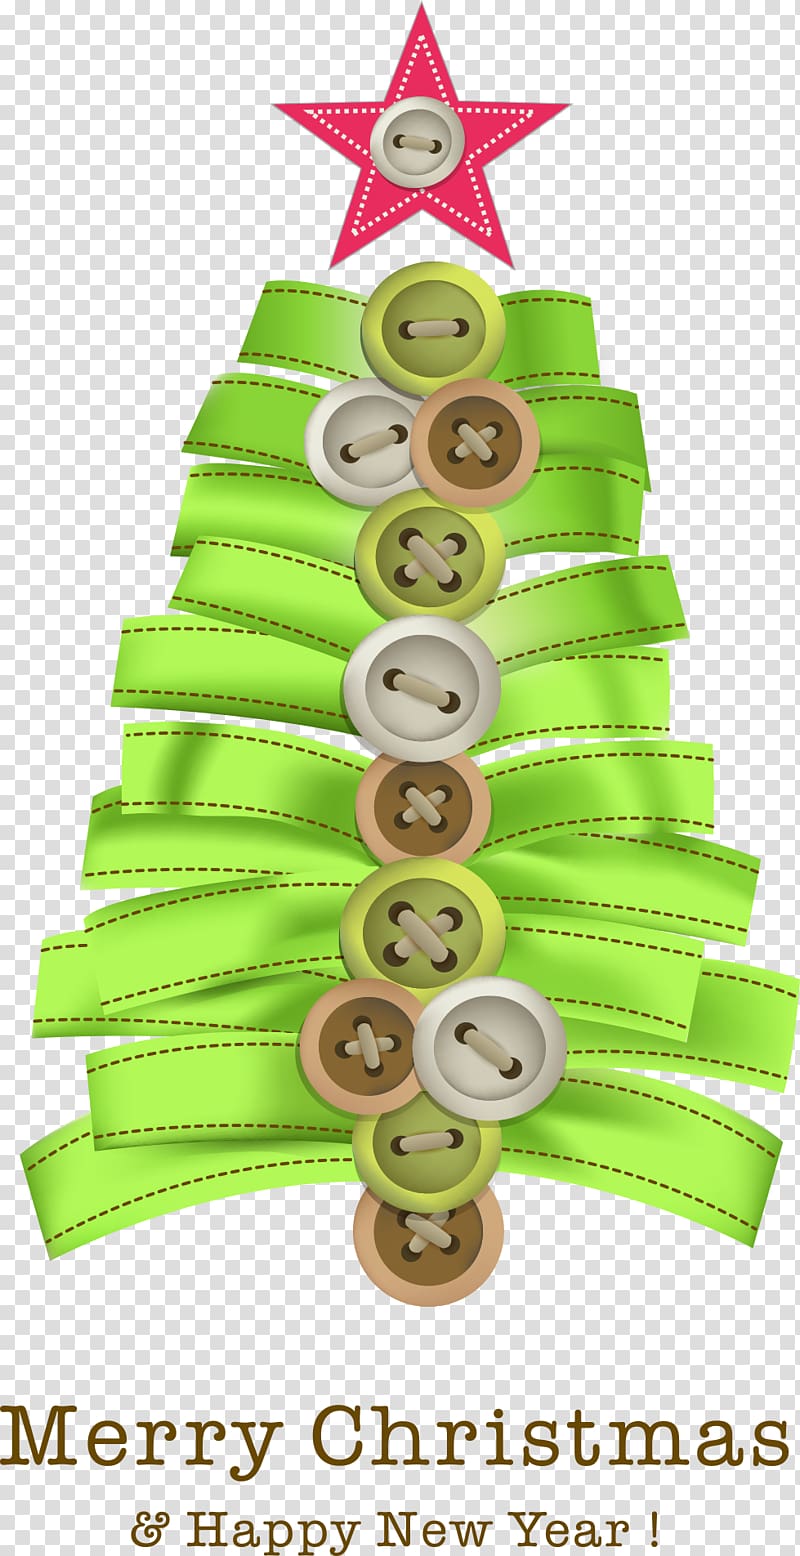 Christmas tree Christmas card Tree-topper, Christmas button with green ribbon transparent background PNG clipart